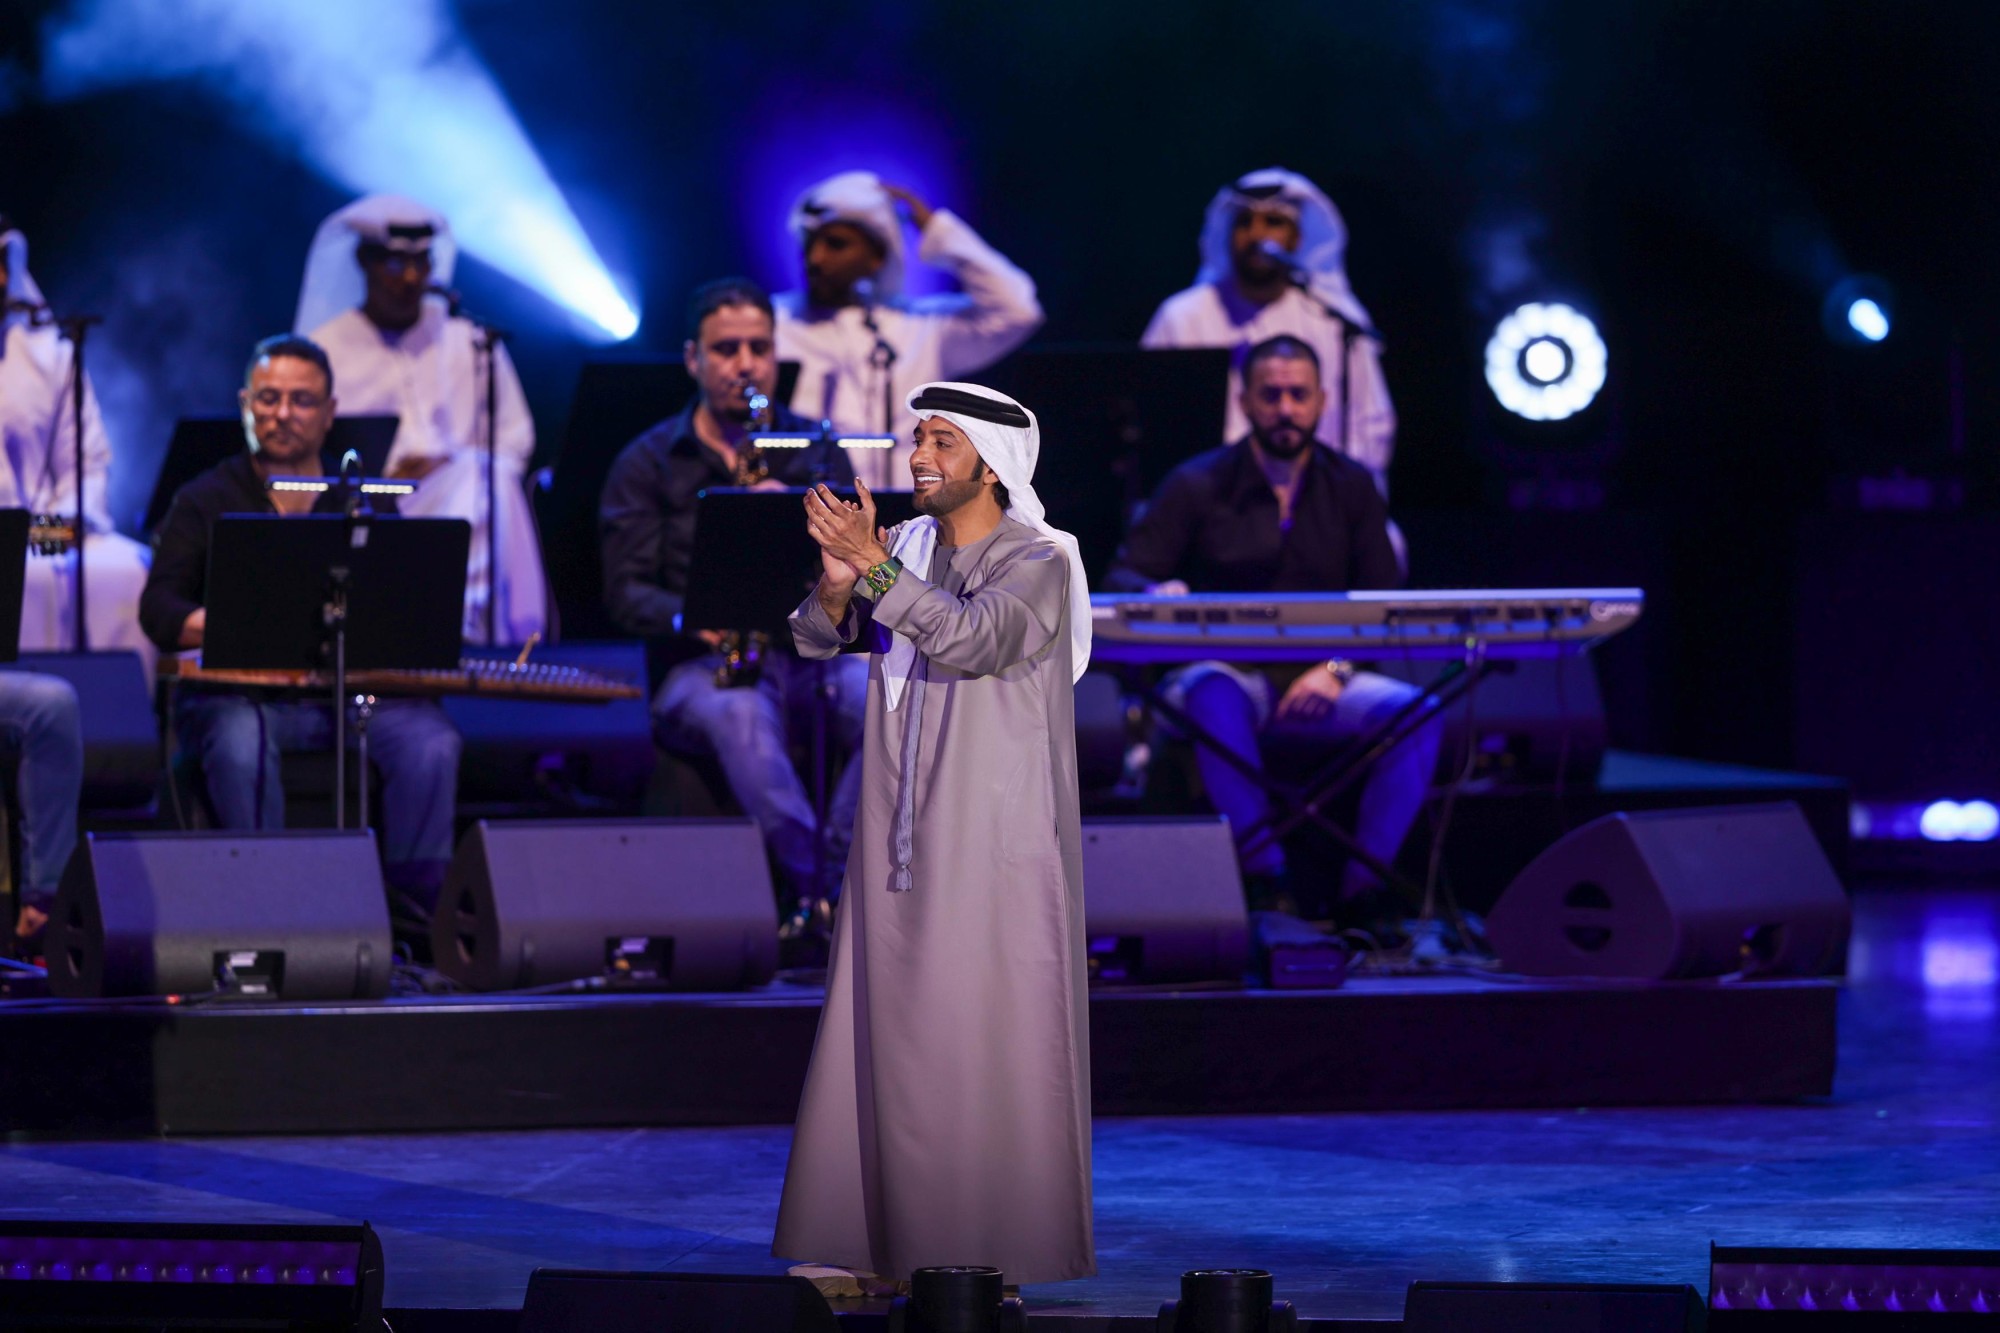 Eidah Al Menhali performs at Jubilee Stage during UAE National Day and the Golden Jubilee Celebrations m16105